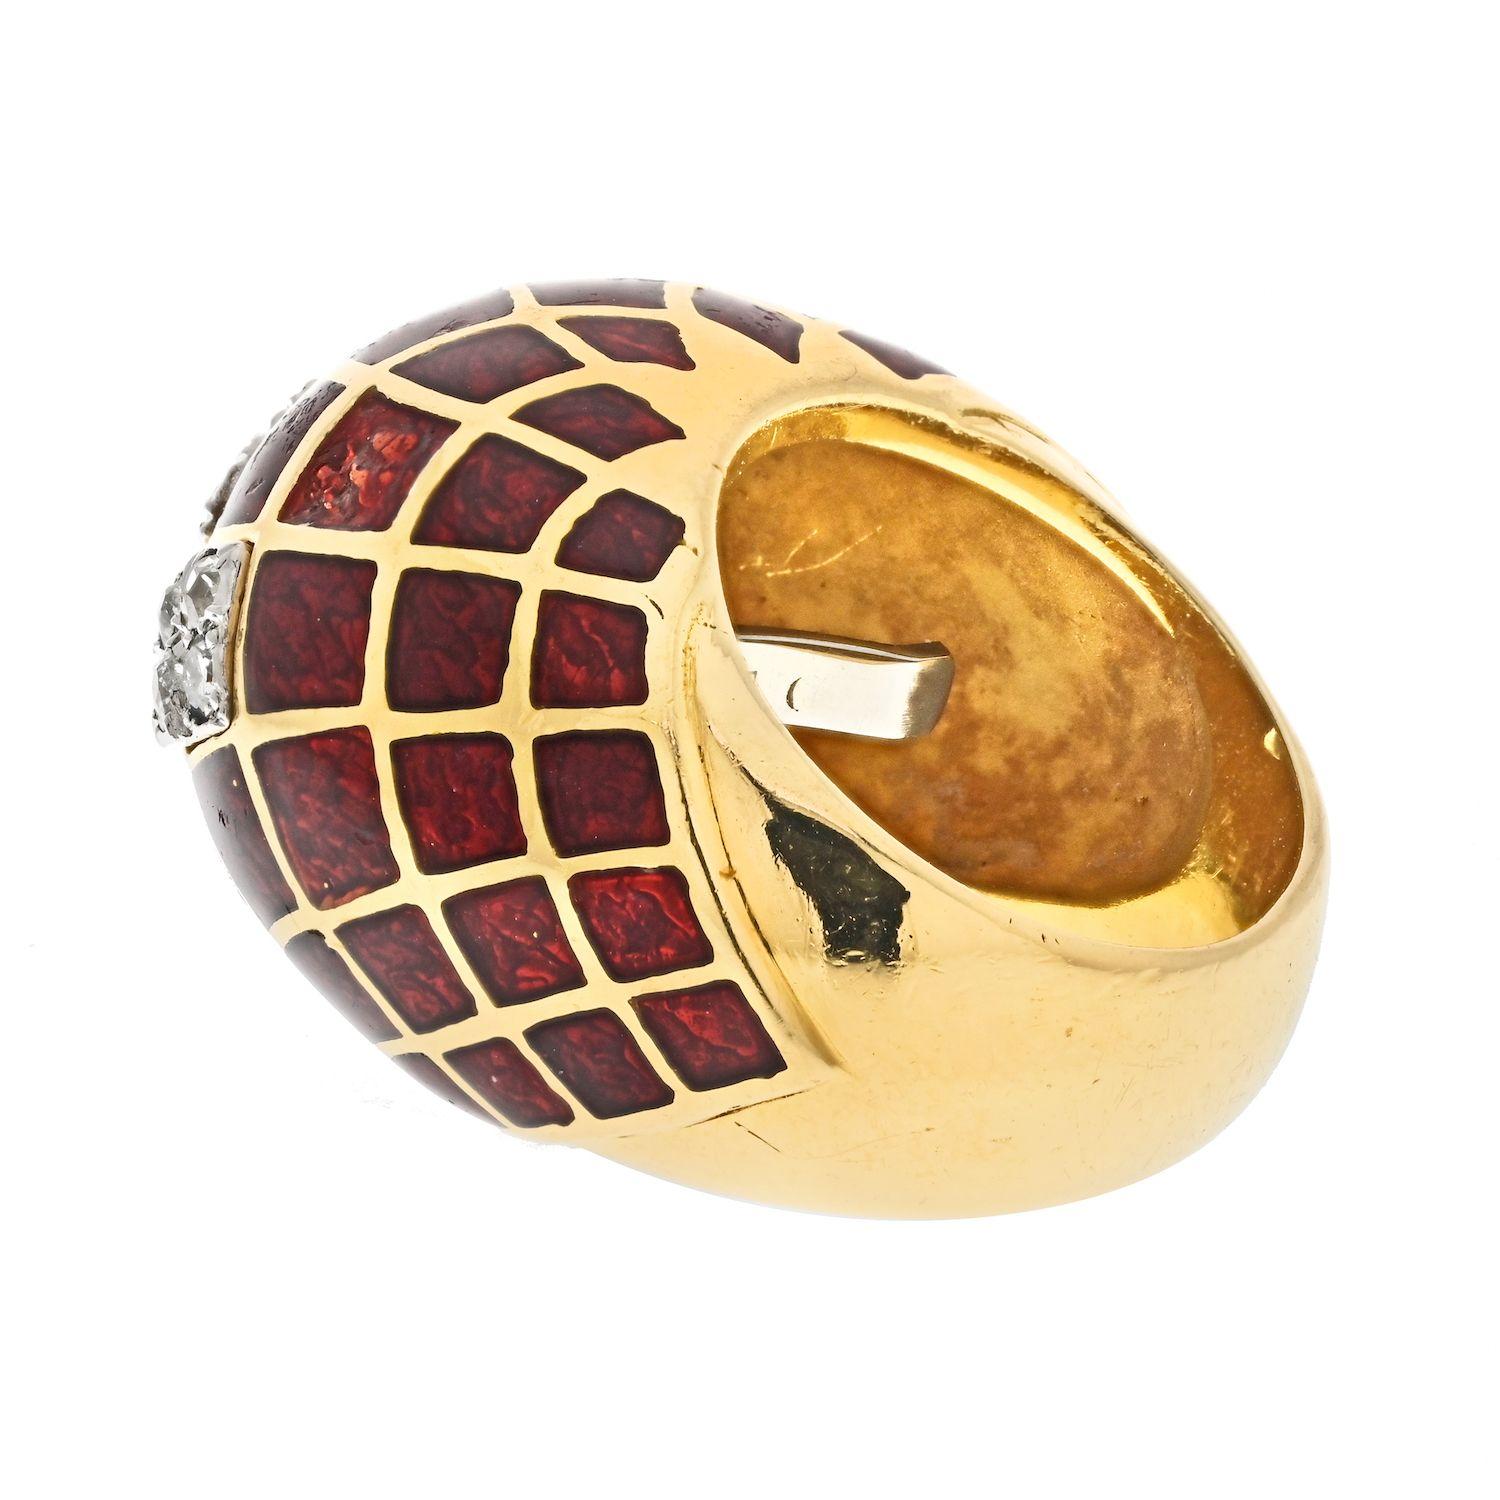 David Webb was a renowned American jewelry designer, known for his distinctive and bold designs. One of his iconic pieces was the bombe-style cocktail rings. A beautiful example of such is this cocktail bomber ring: featuring his recognizable